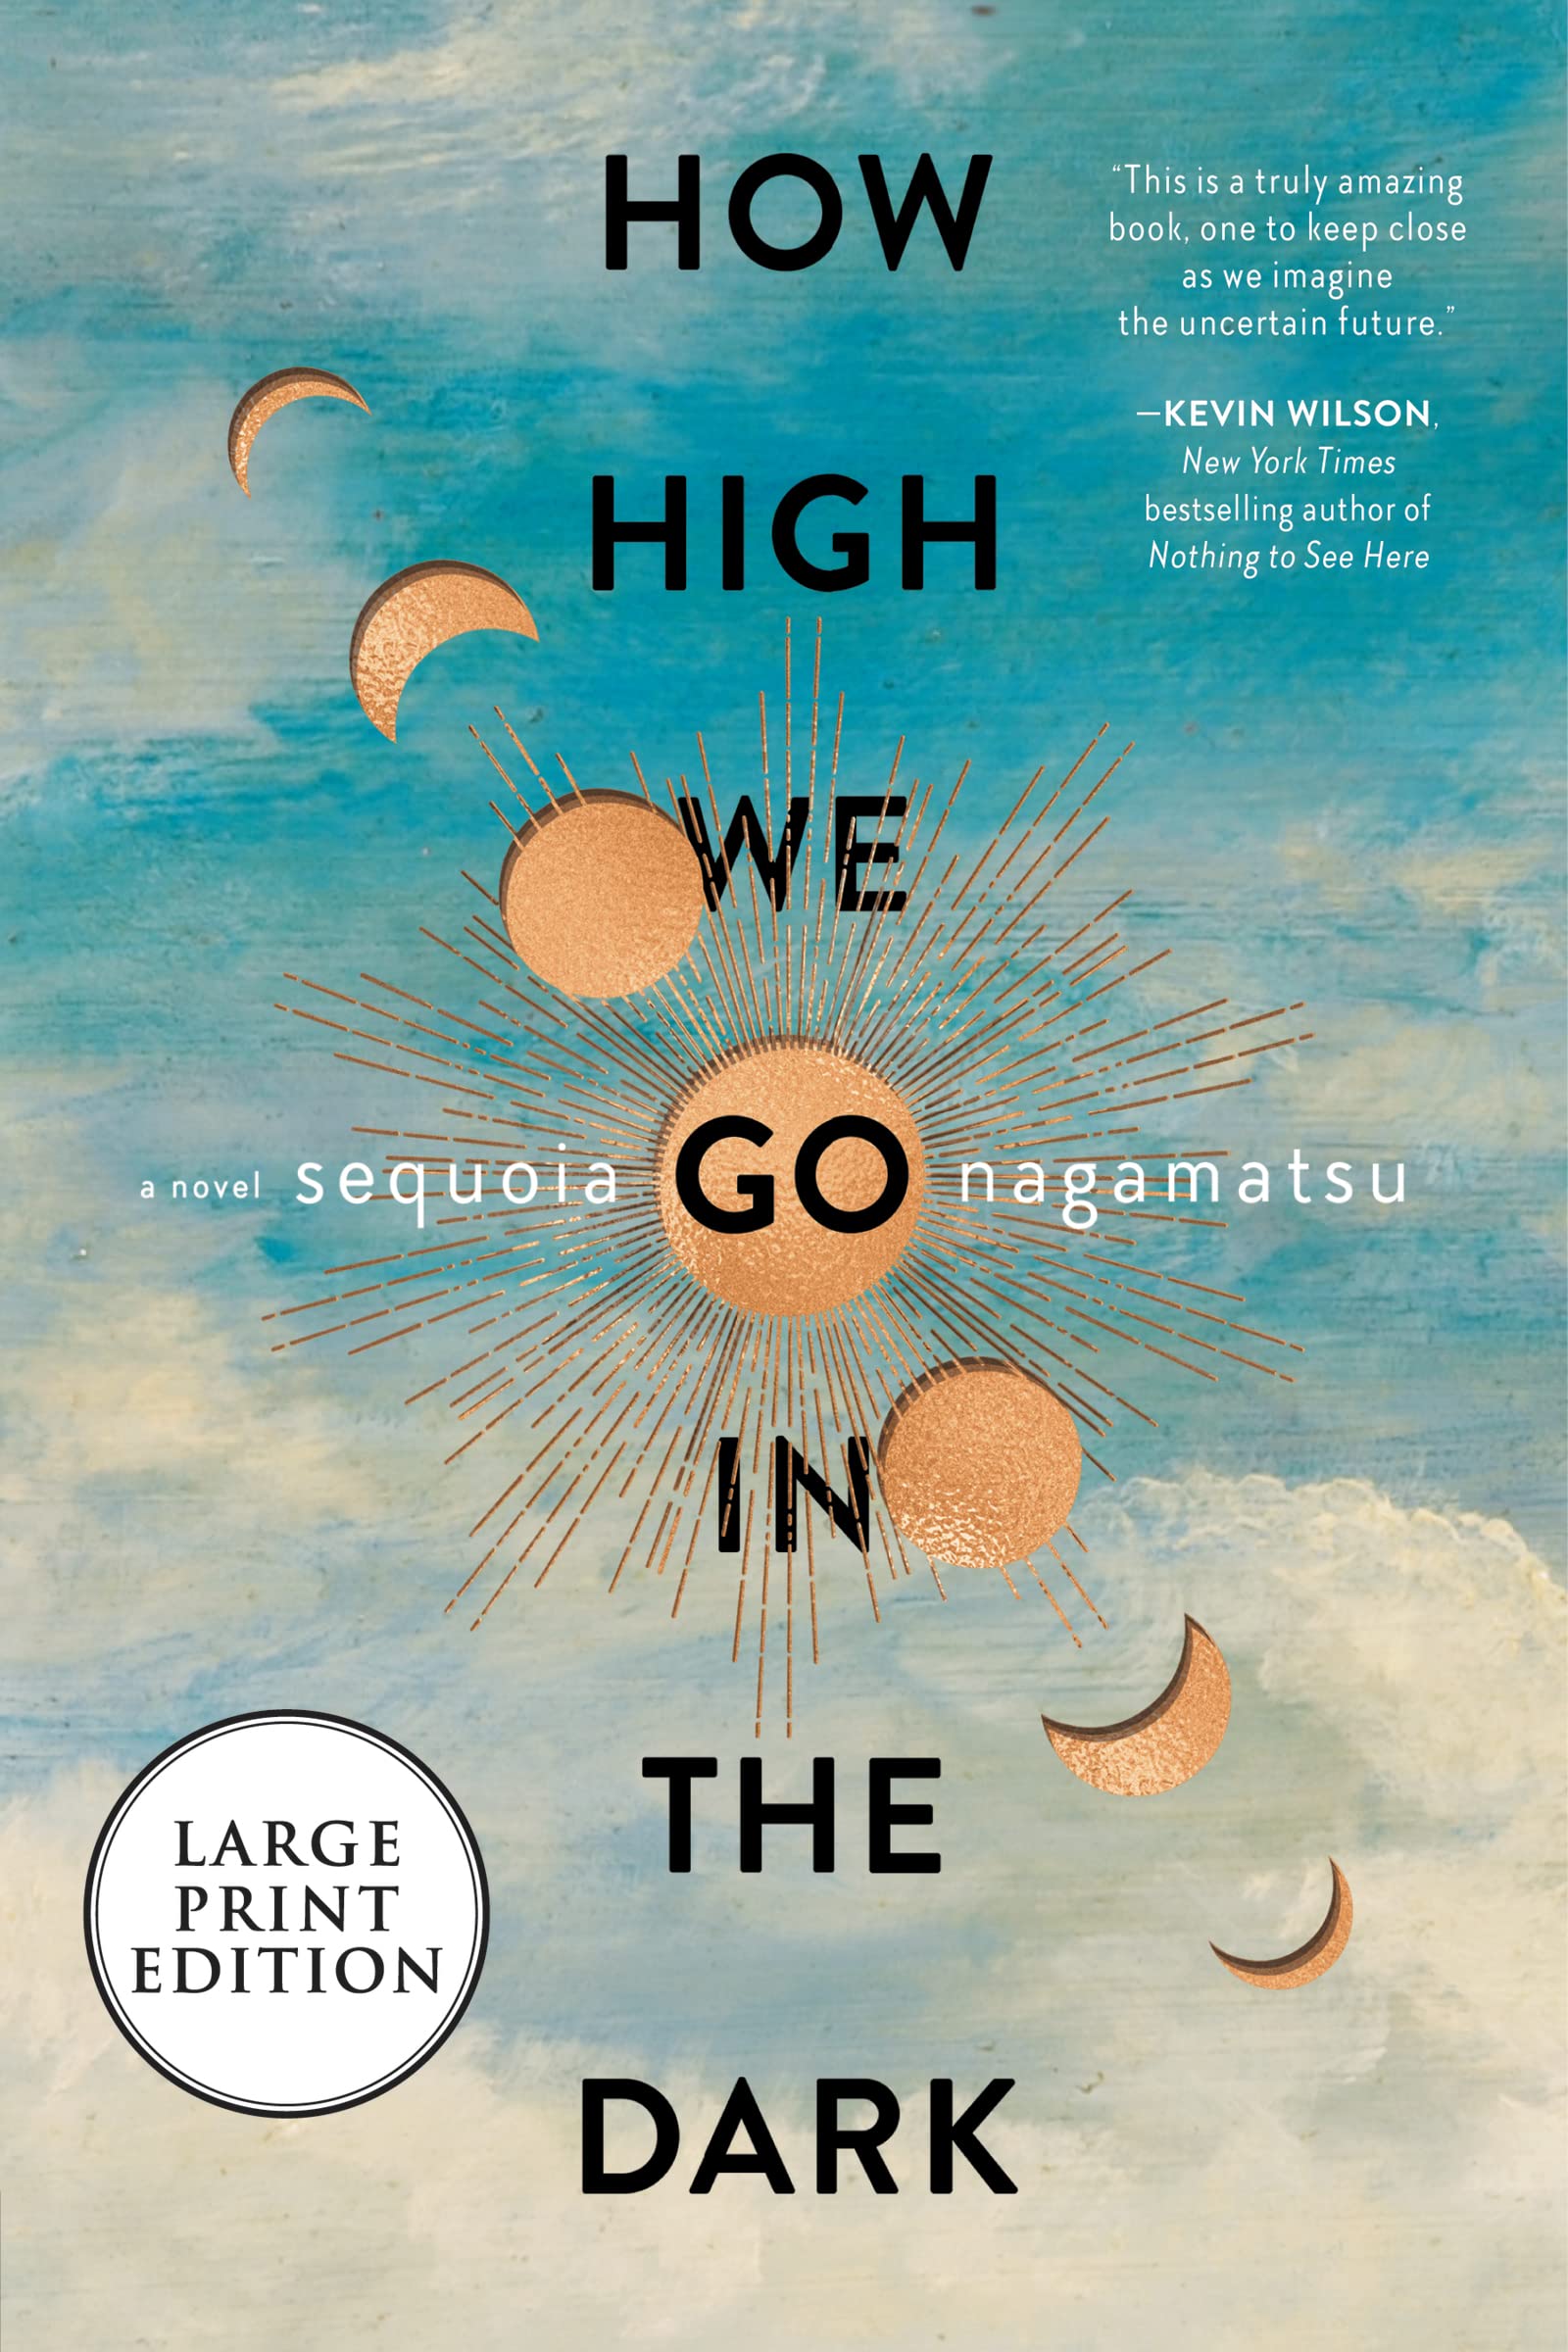 Image of the cover of How High We Go in the Dark (light-blue sky with clouds and moon cycle pictured diagonally).